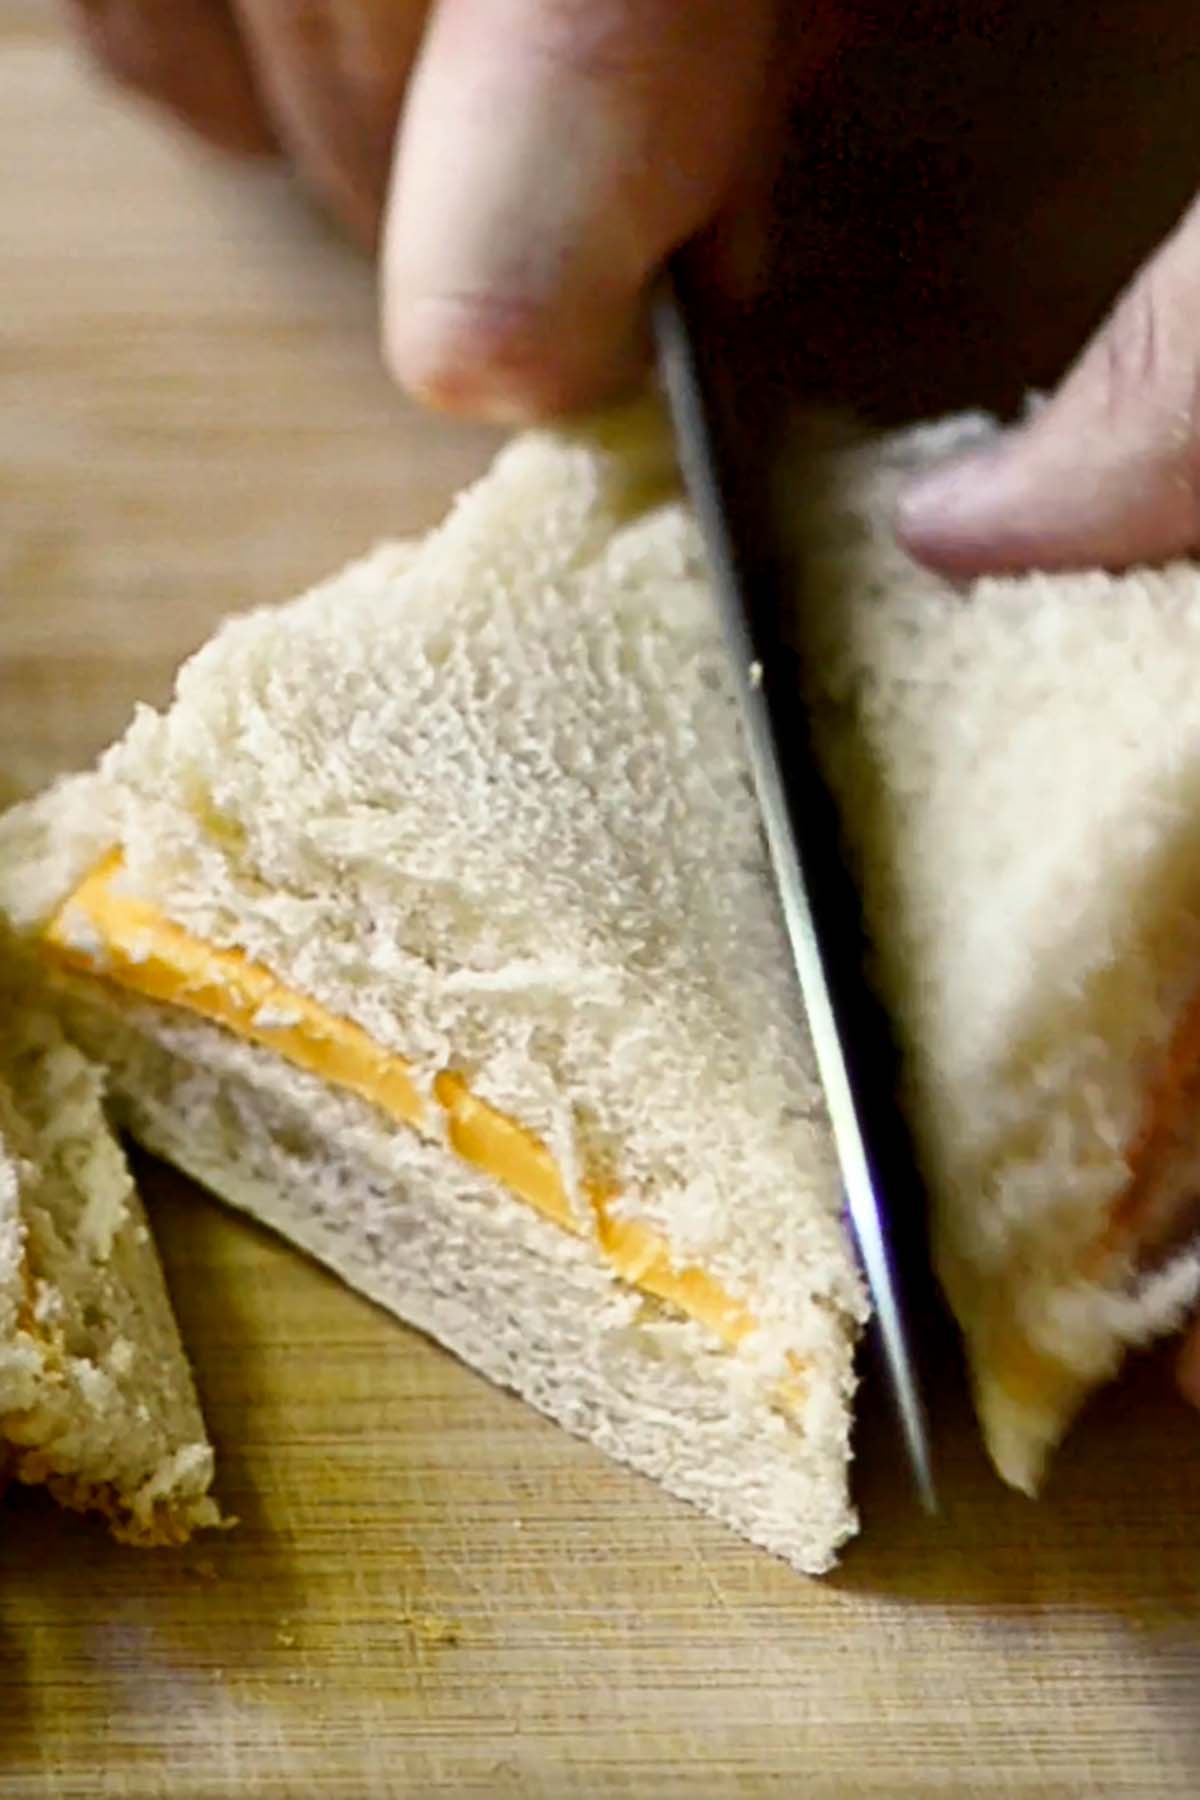 A cheese sandwich with the crust cut off being sliced in half diagonally.